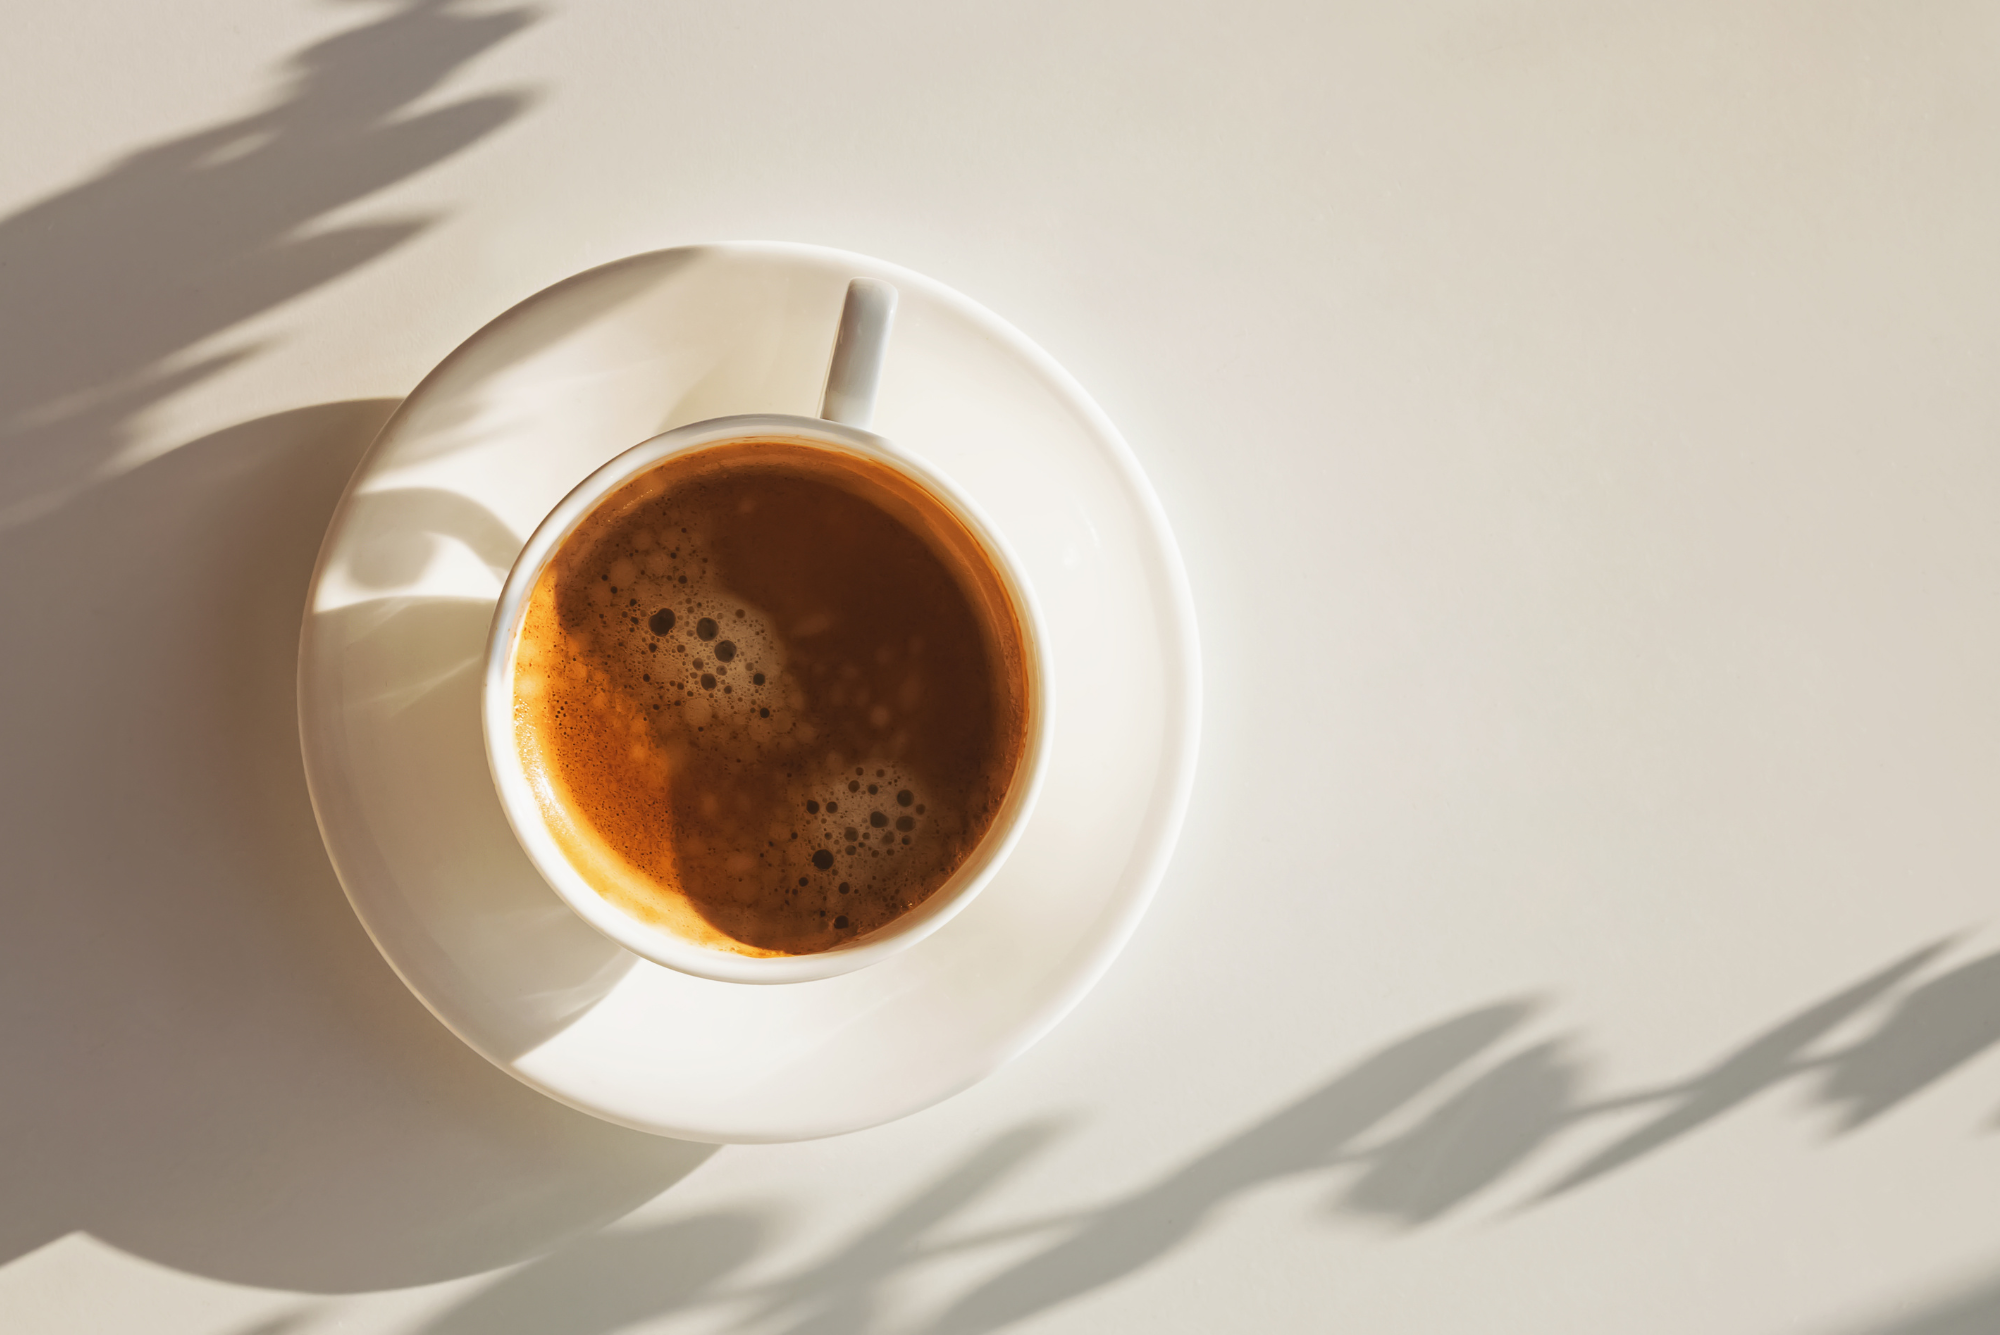 Can You Drink Coffee While Fasting?